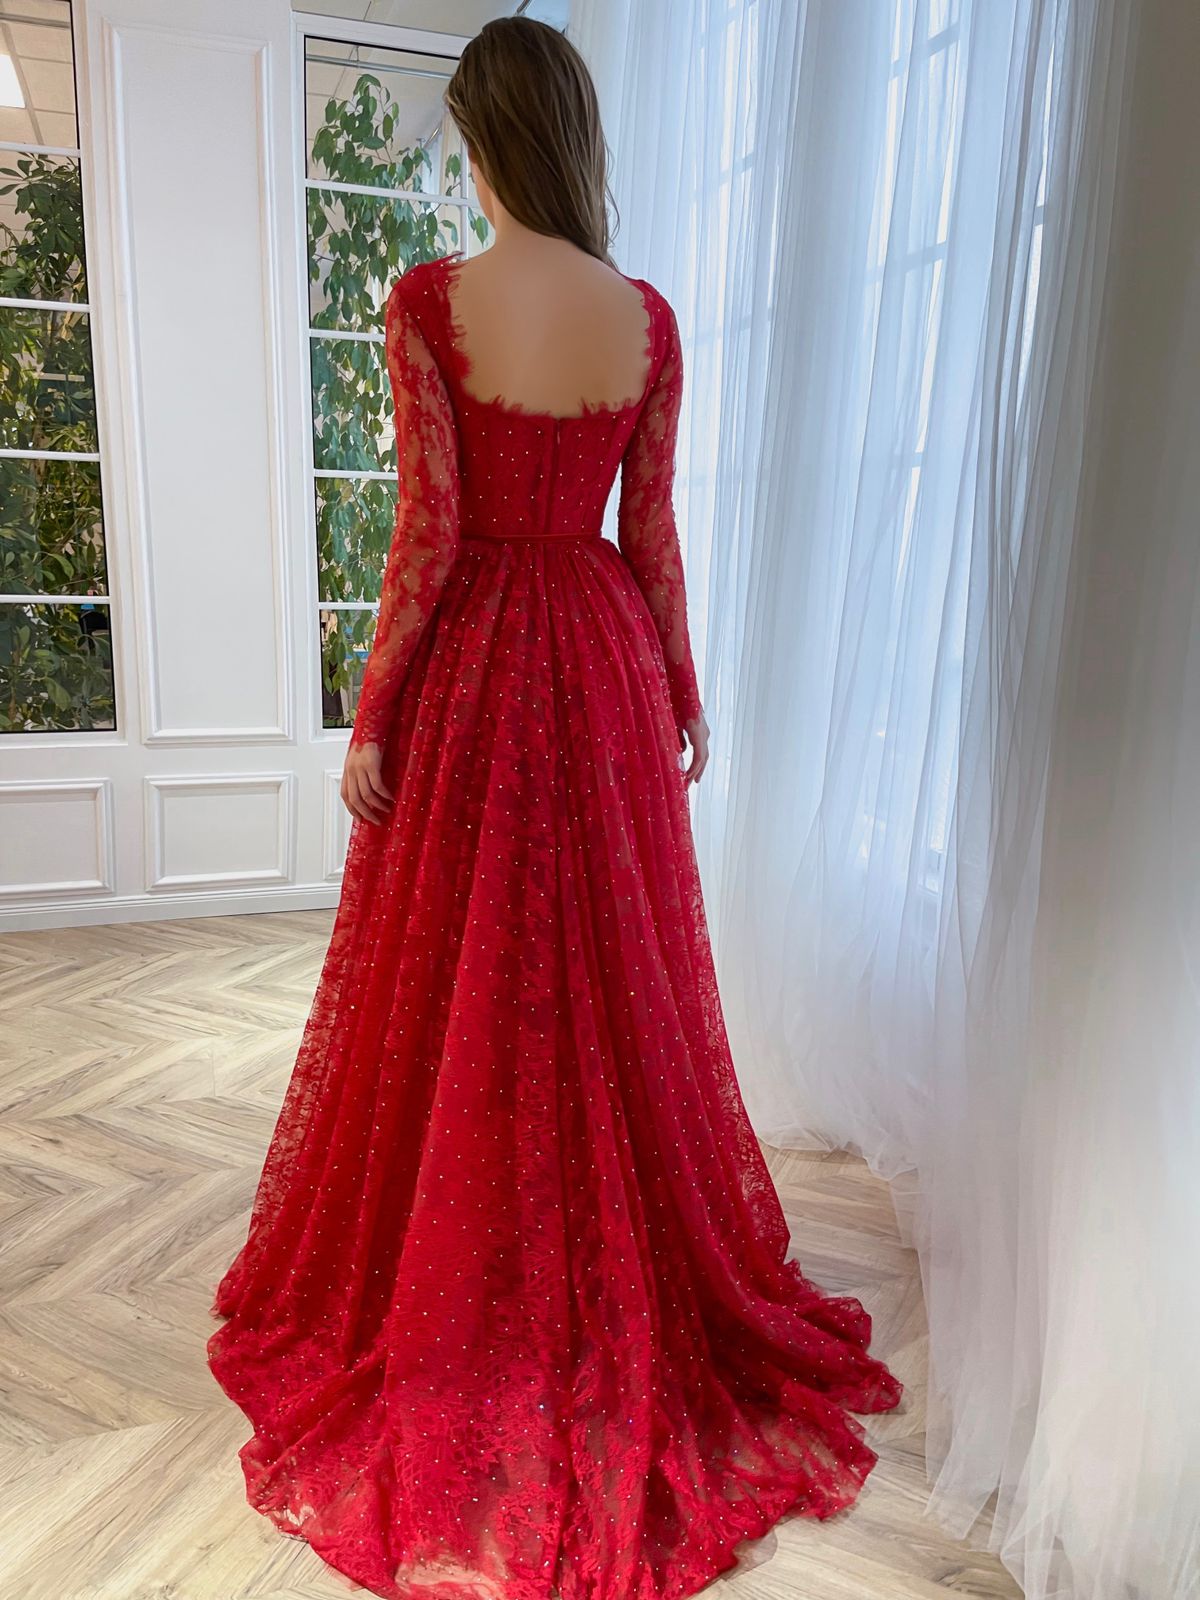 Red A-Line dress with long sleeves and lace